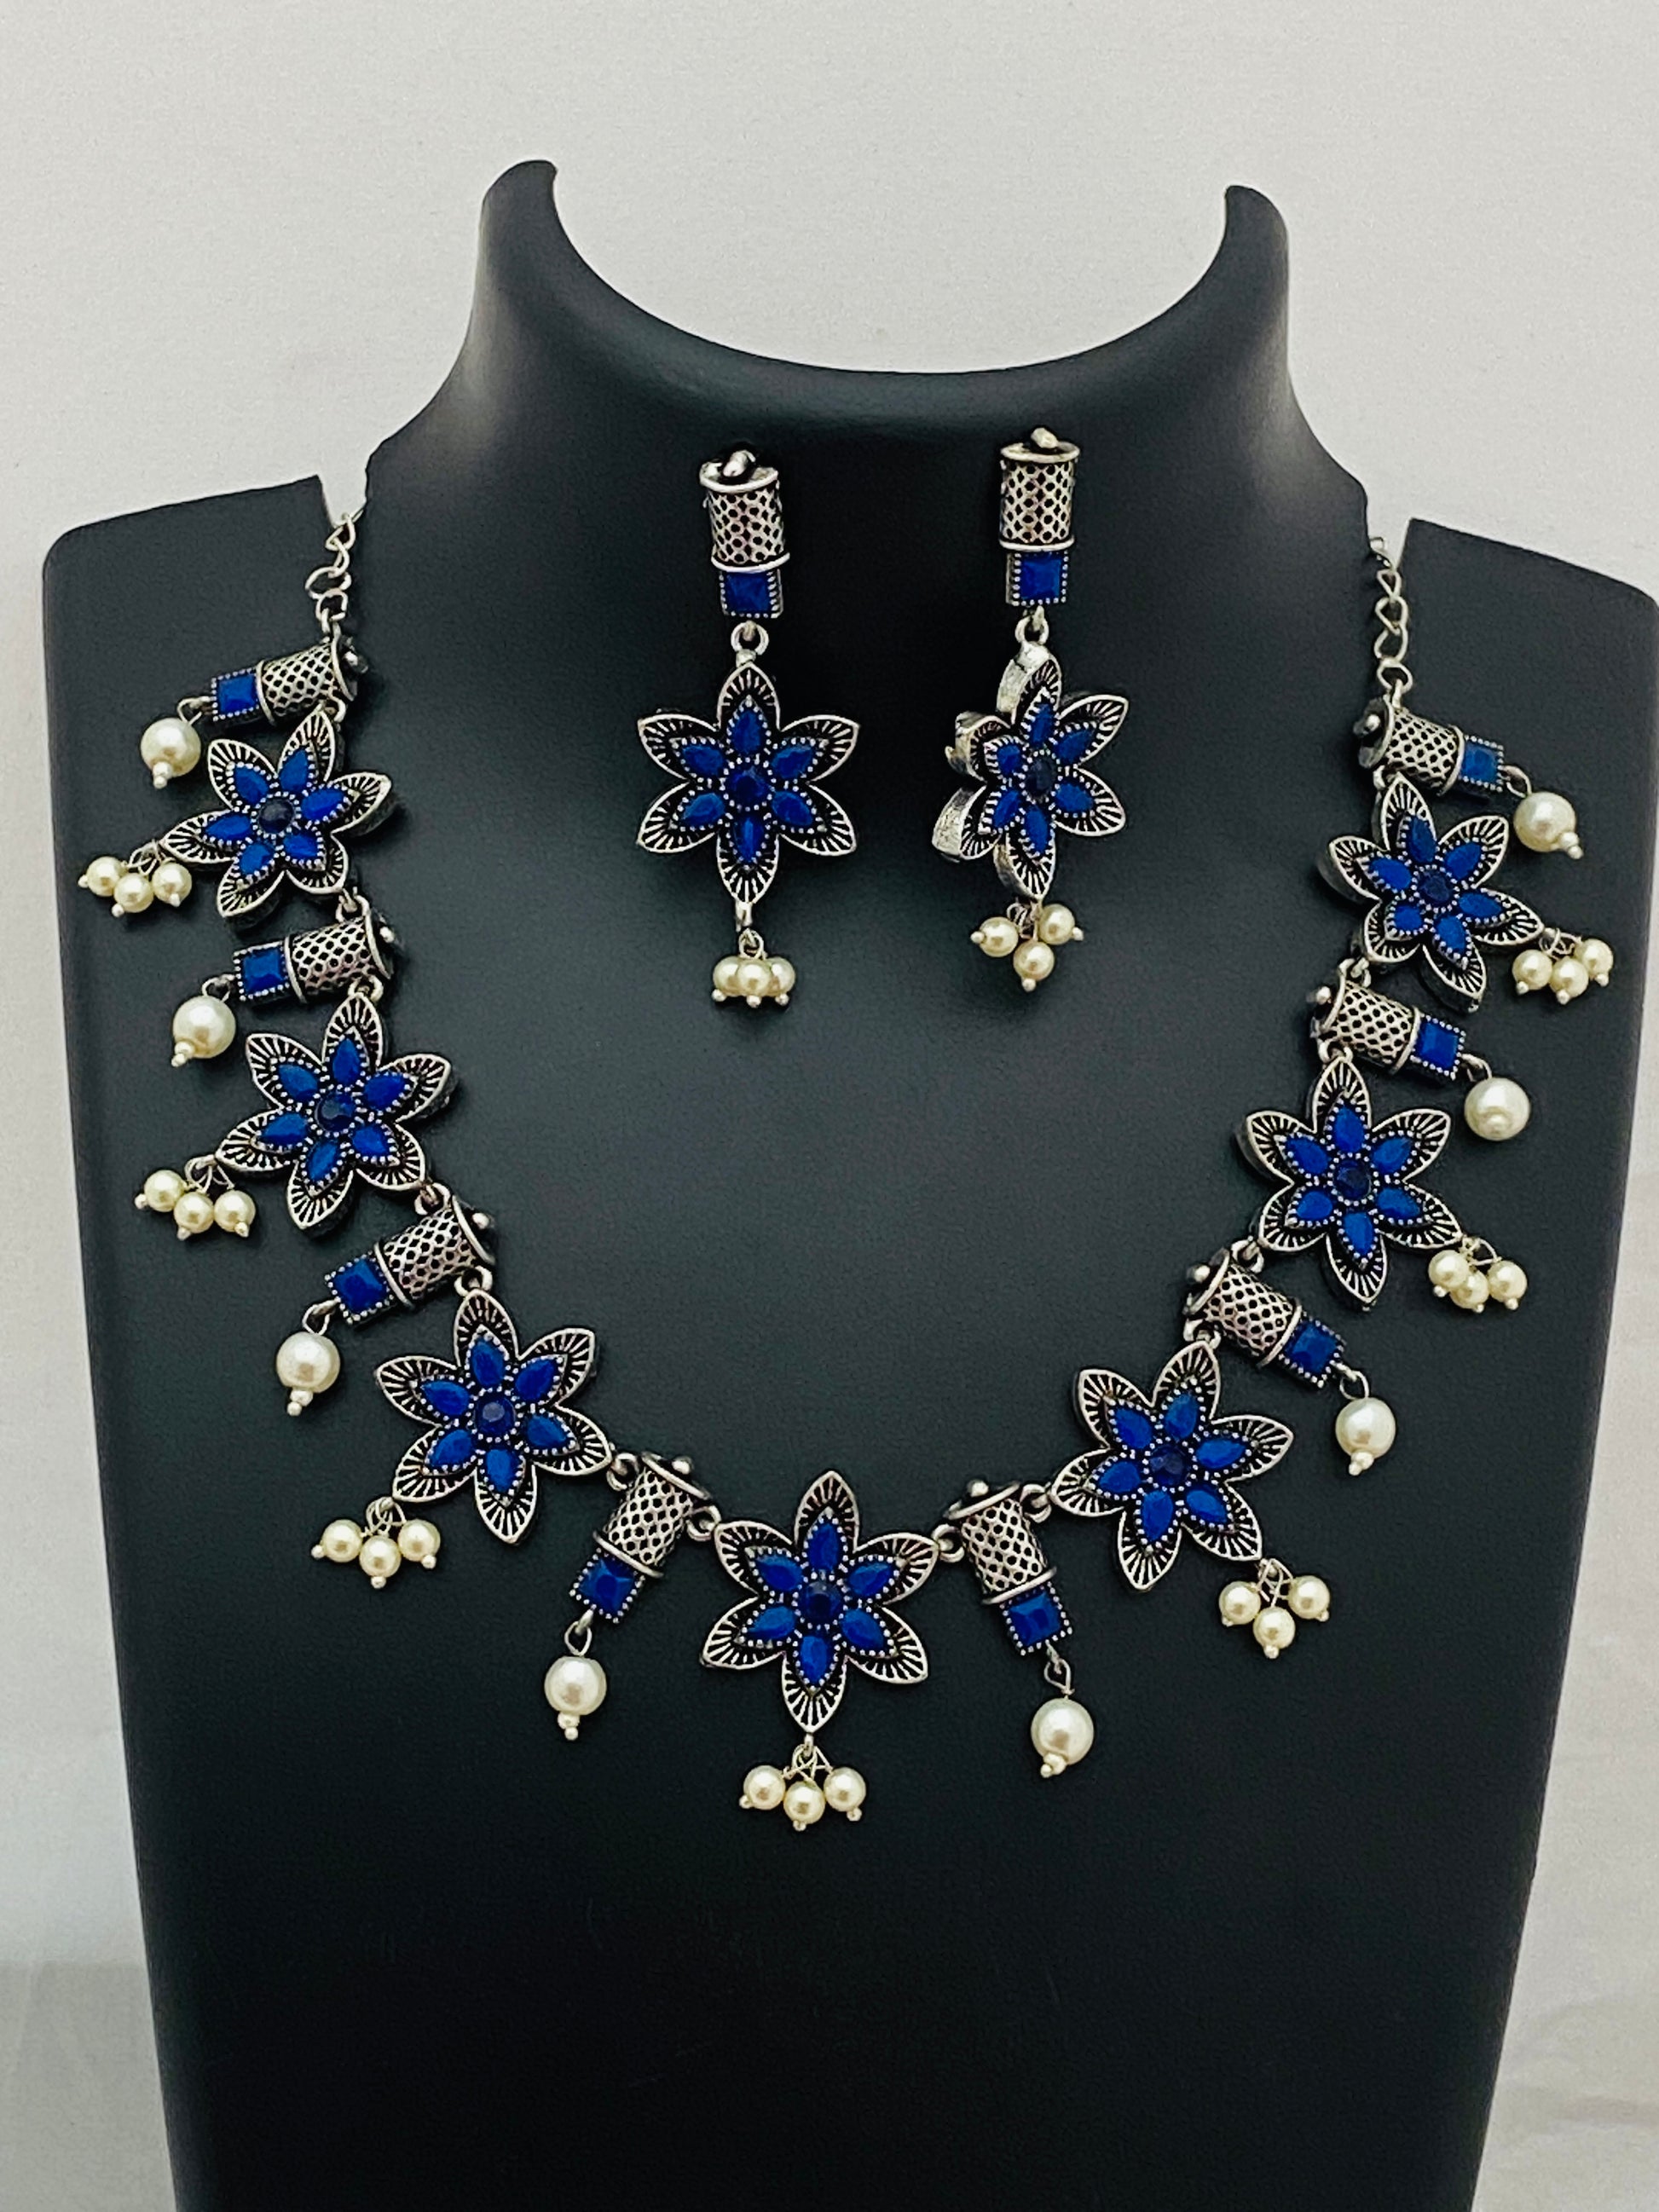 Ravishing Unique Design Silver Dual Toned Blue Stoned Necklace With Earrings